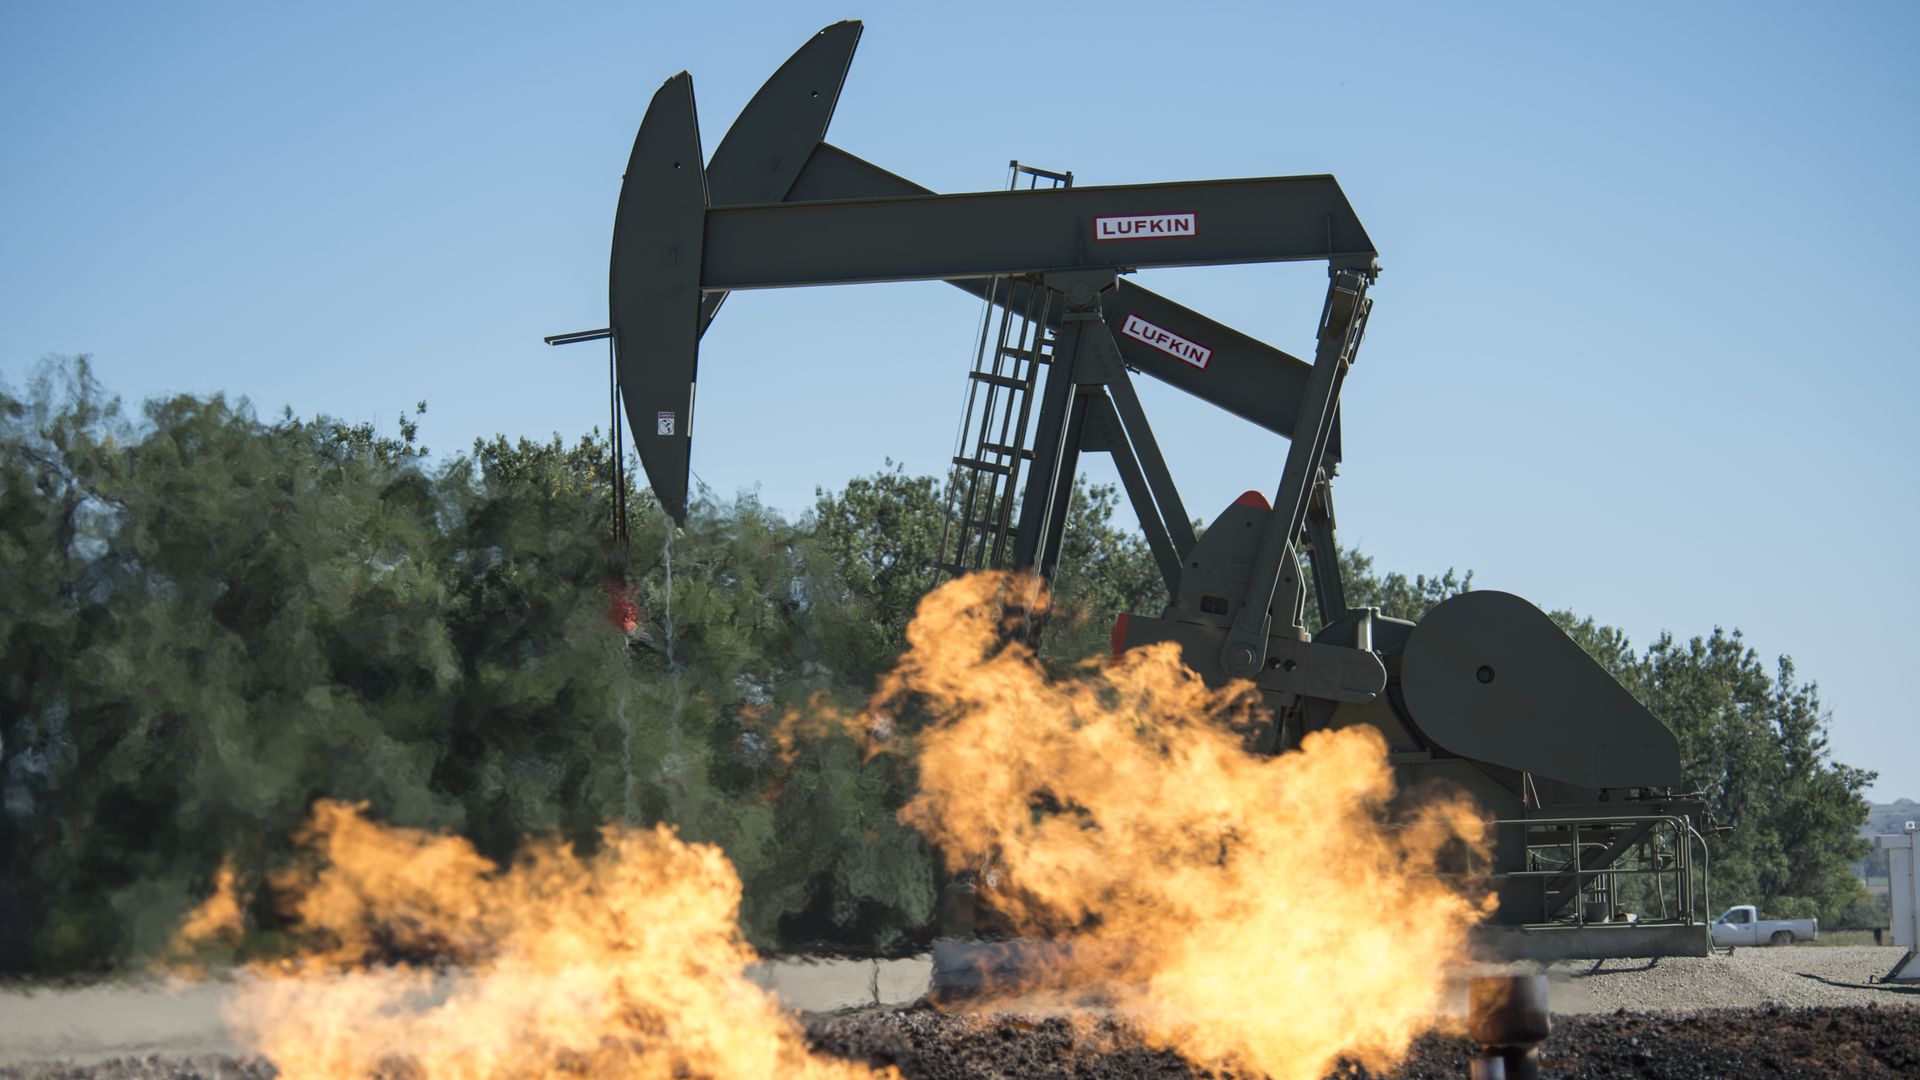 A gas drilling rig with flames from flaring gas coming up from the ground.